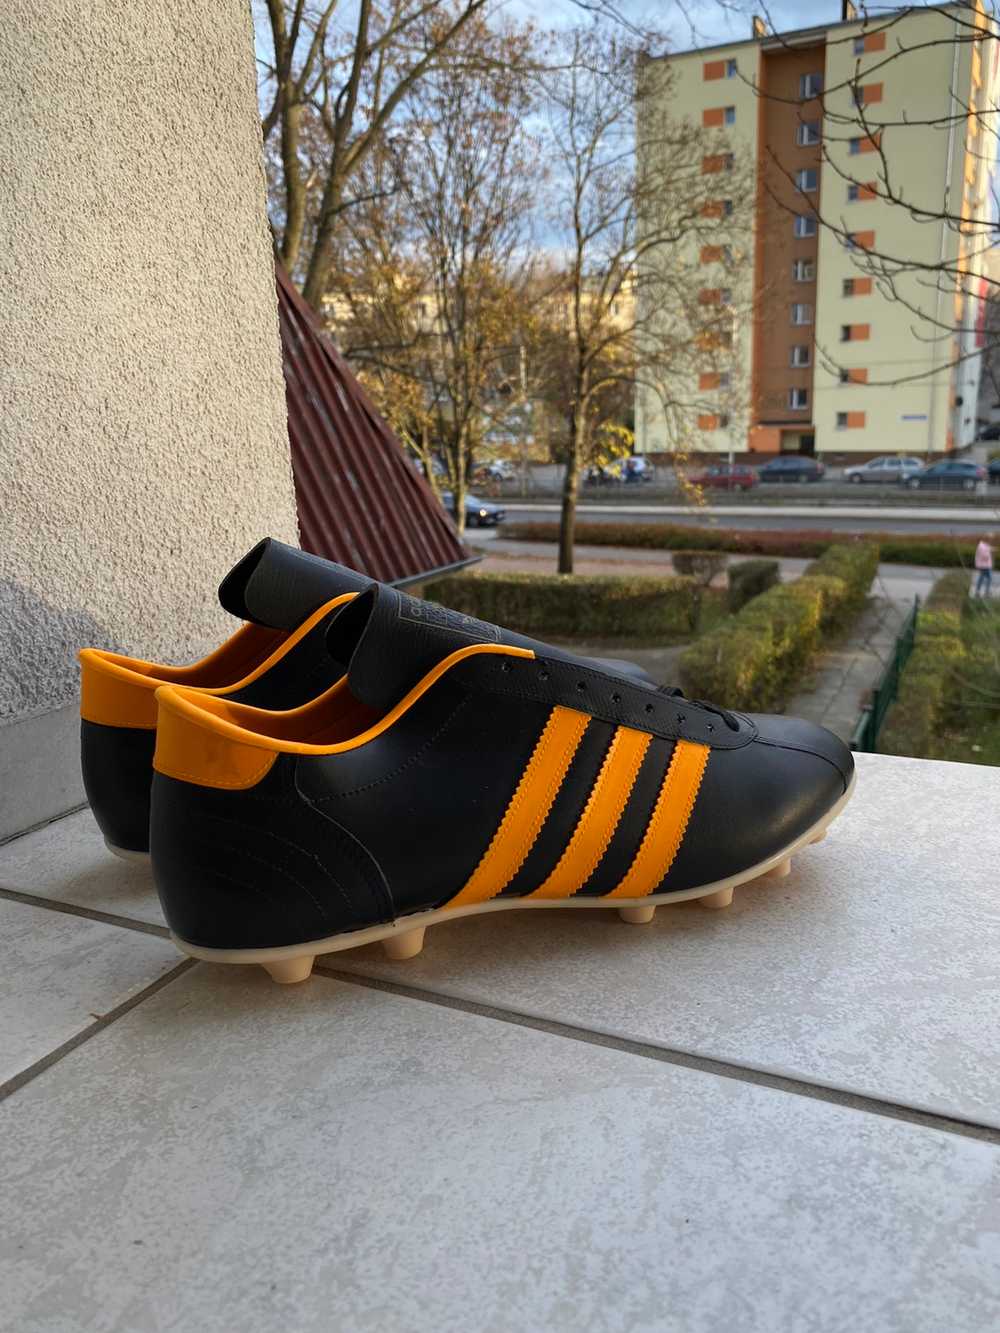 Adidas Kid made in France 70-80s football boots - image 1